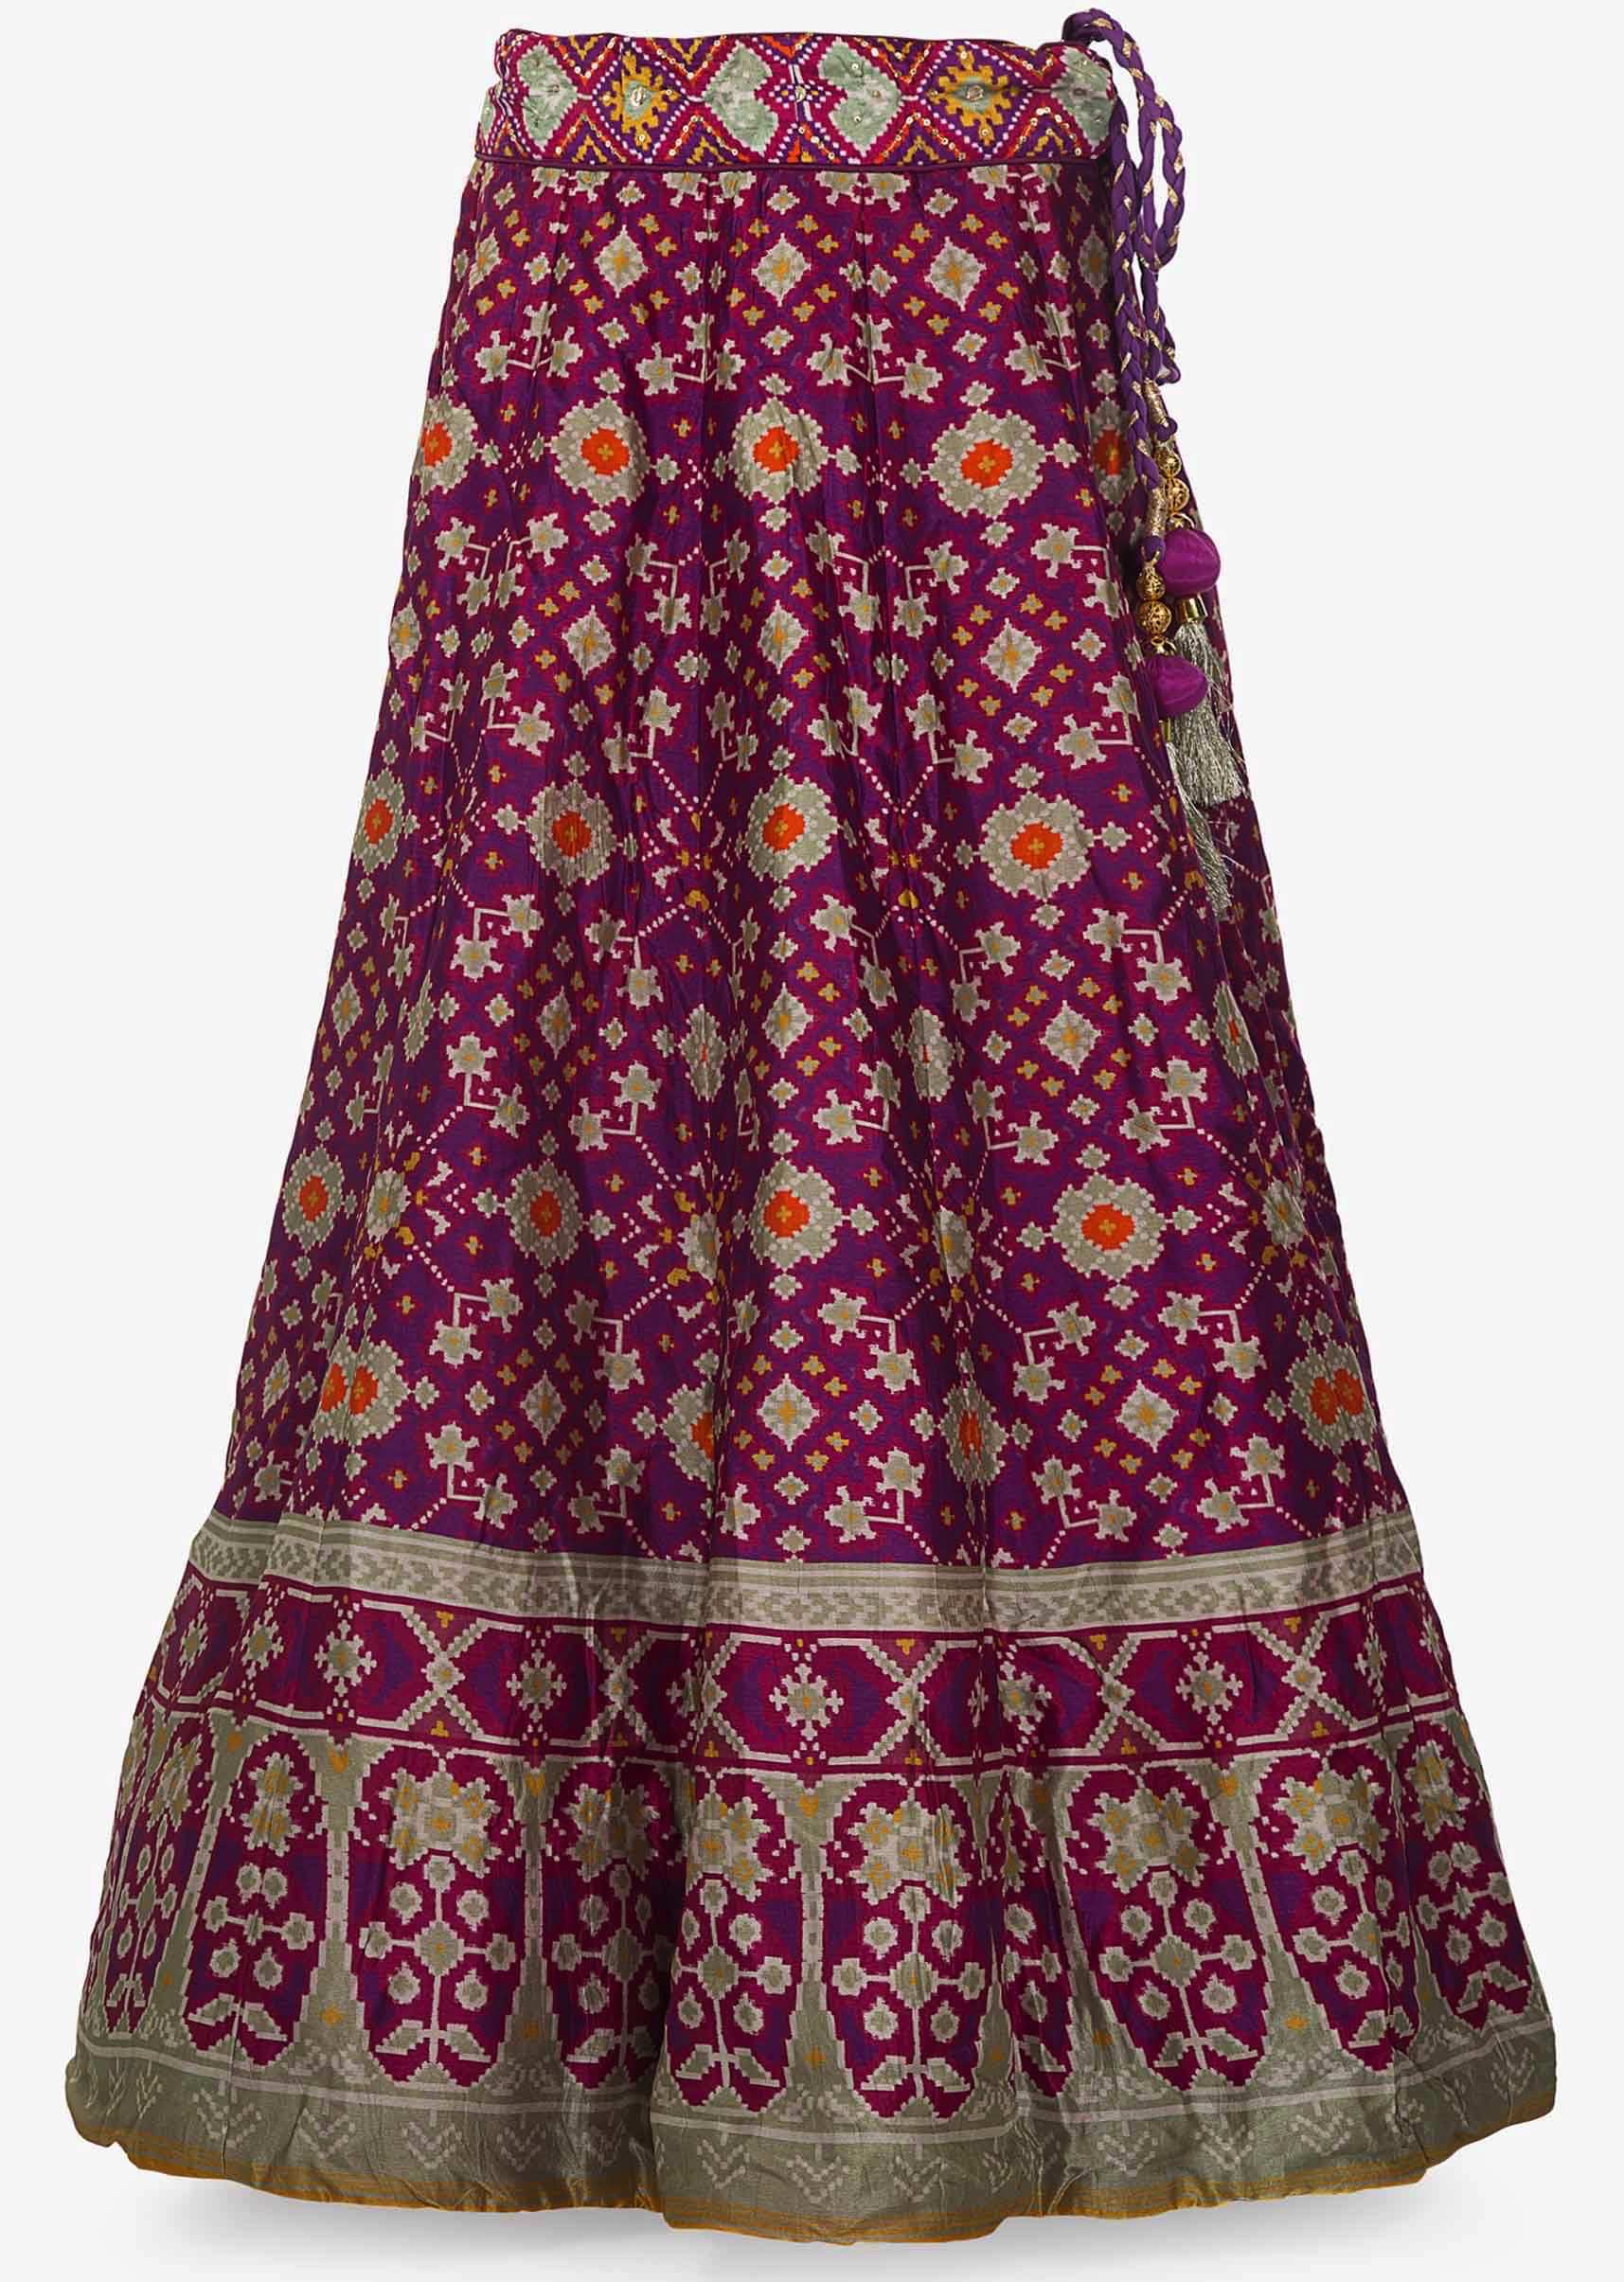 Purple Lehenga Matched With Rani Pink Embroidered Blouse In Brocade Dupatta Online - Kalki Fashion